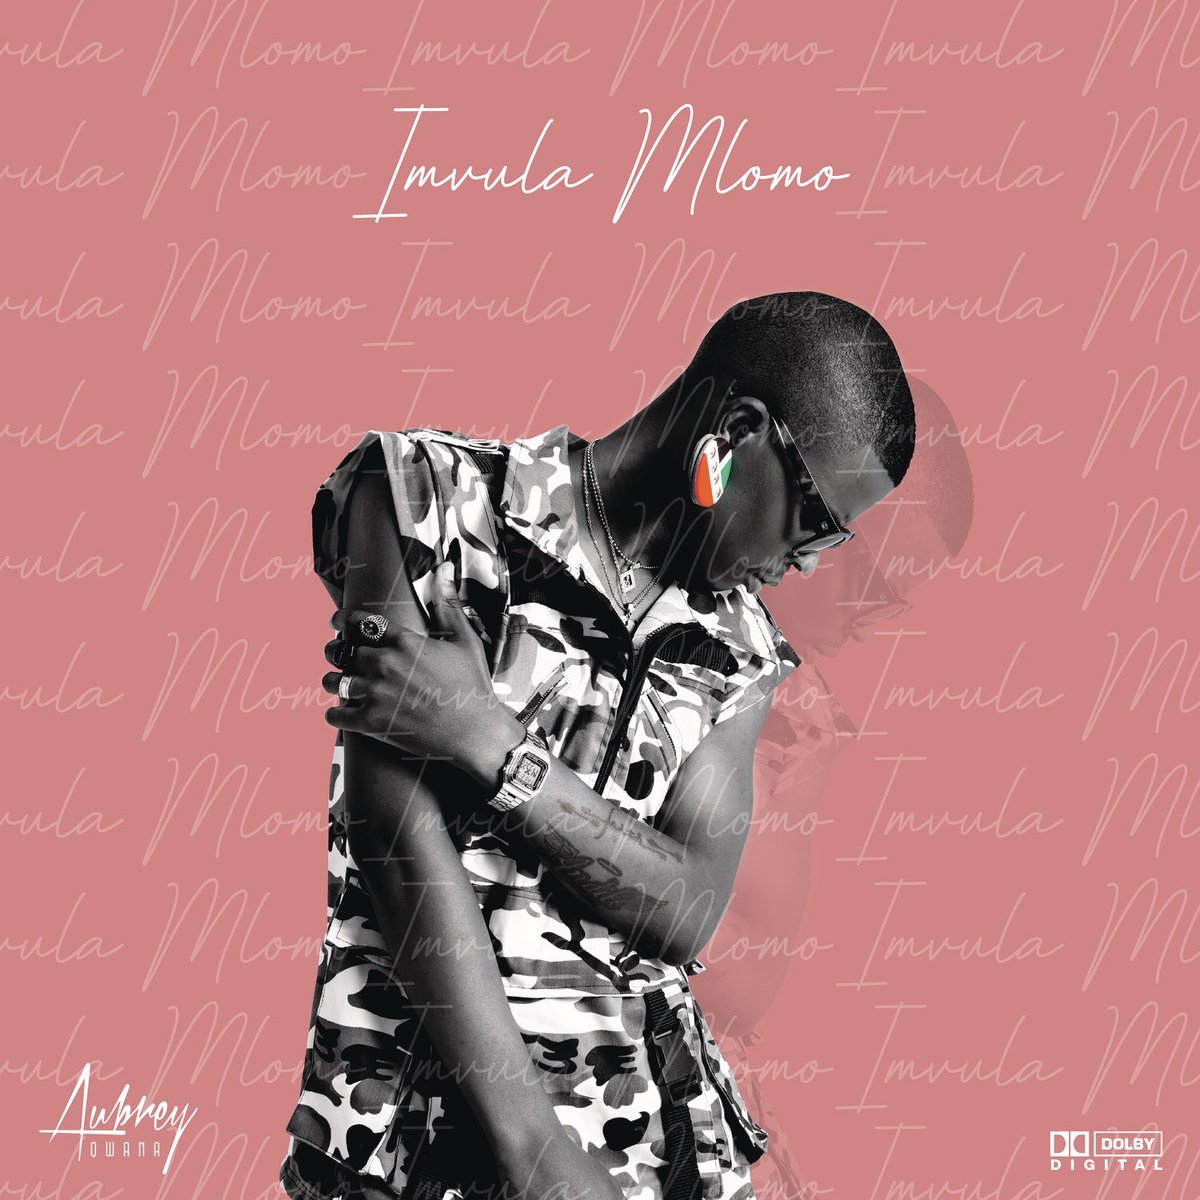 49. Aubrey Qwana - Imvula Mlomo (the house, pop and amapiano music coming out of South Africa is the most exciting music in the world right now)